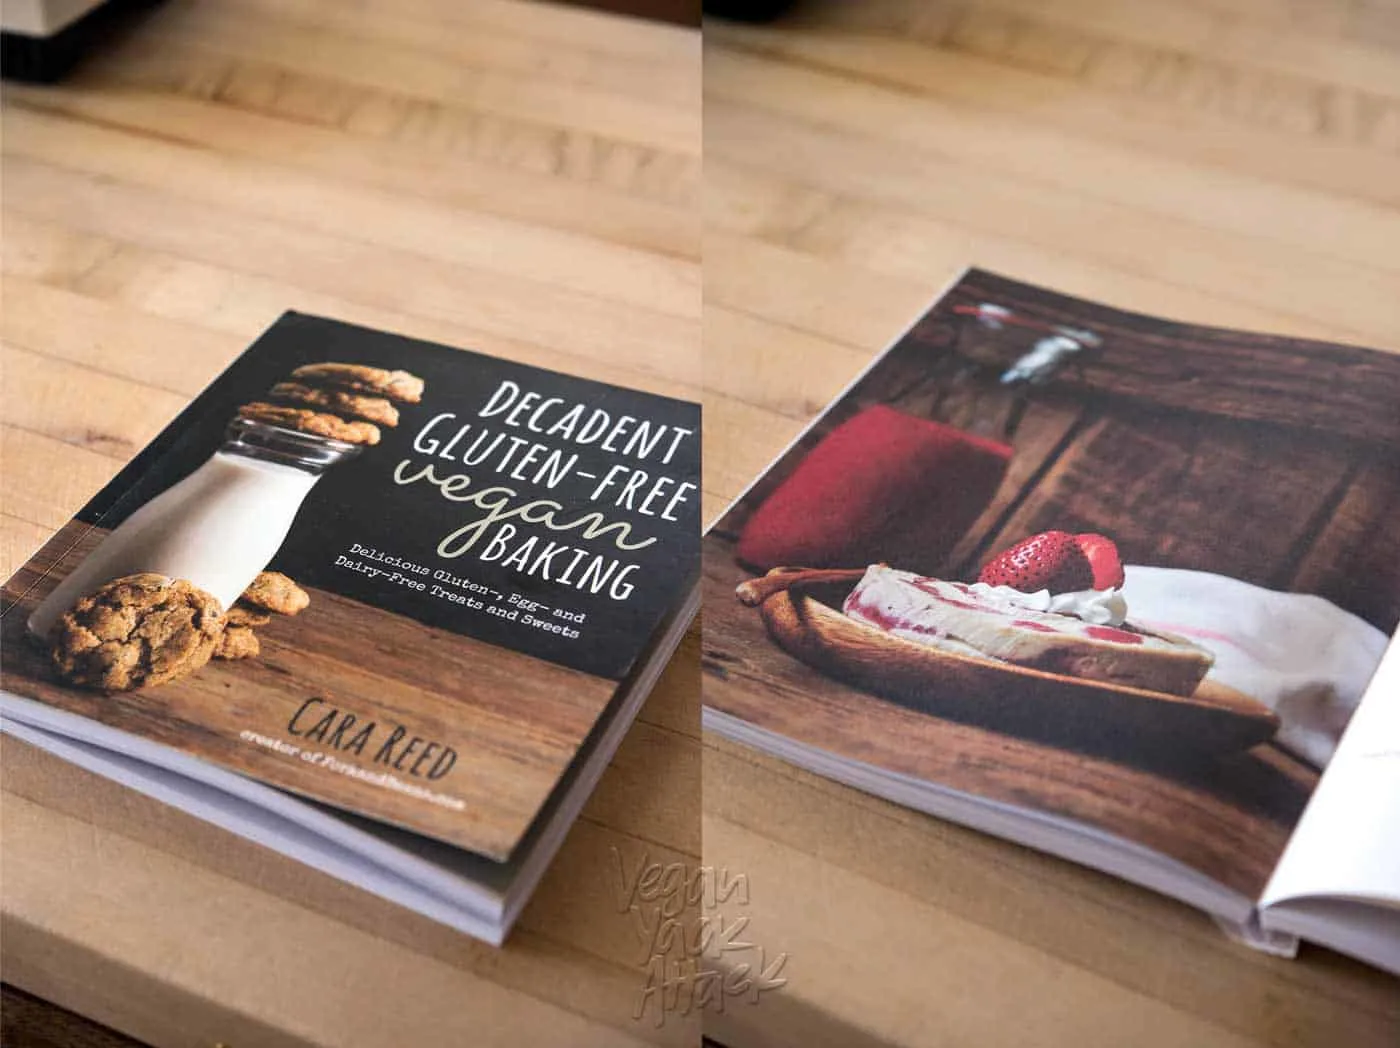 Decadent gluten-free vegan baking cookbook closed and open on counter